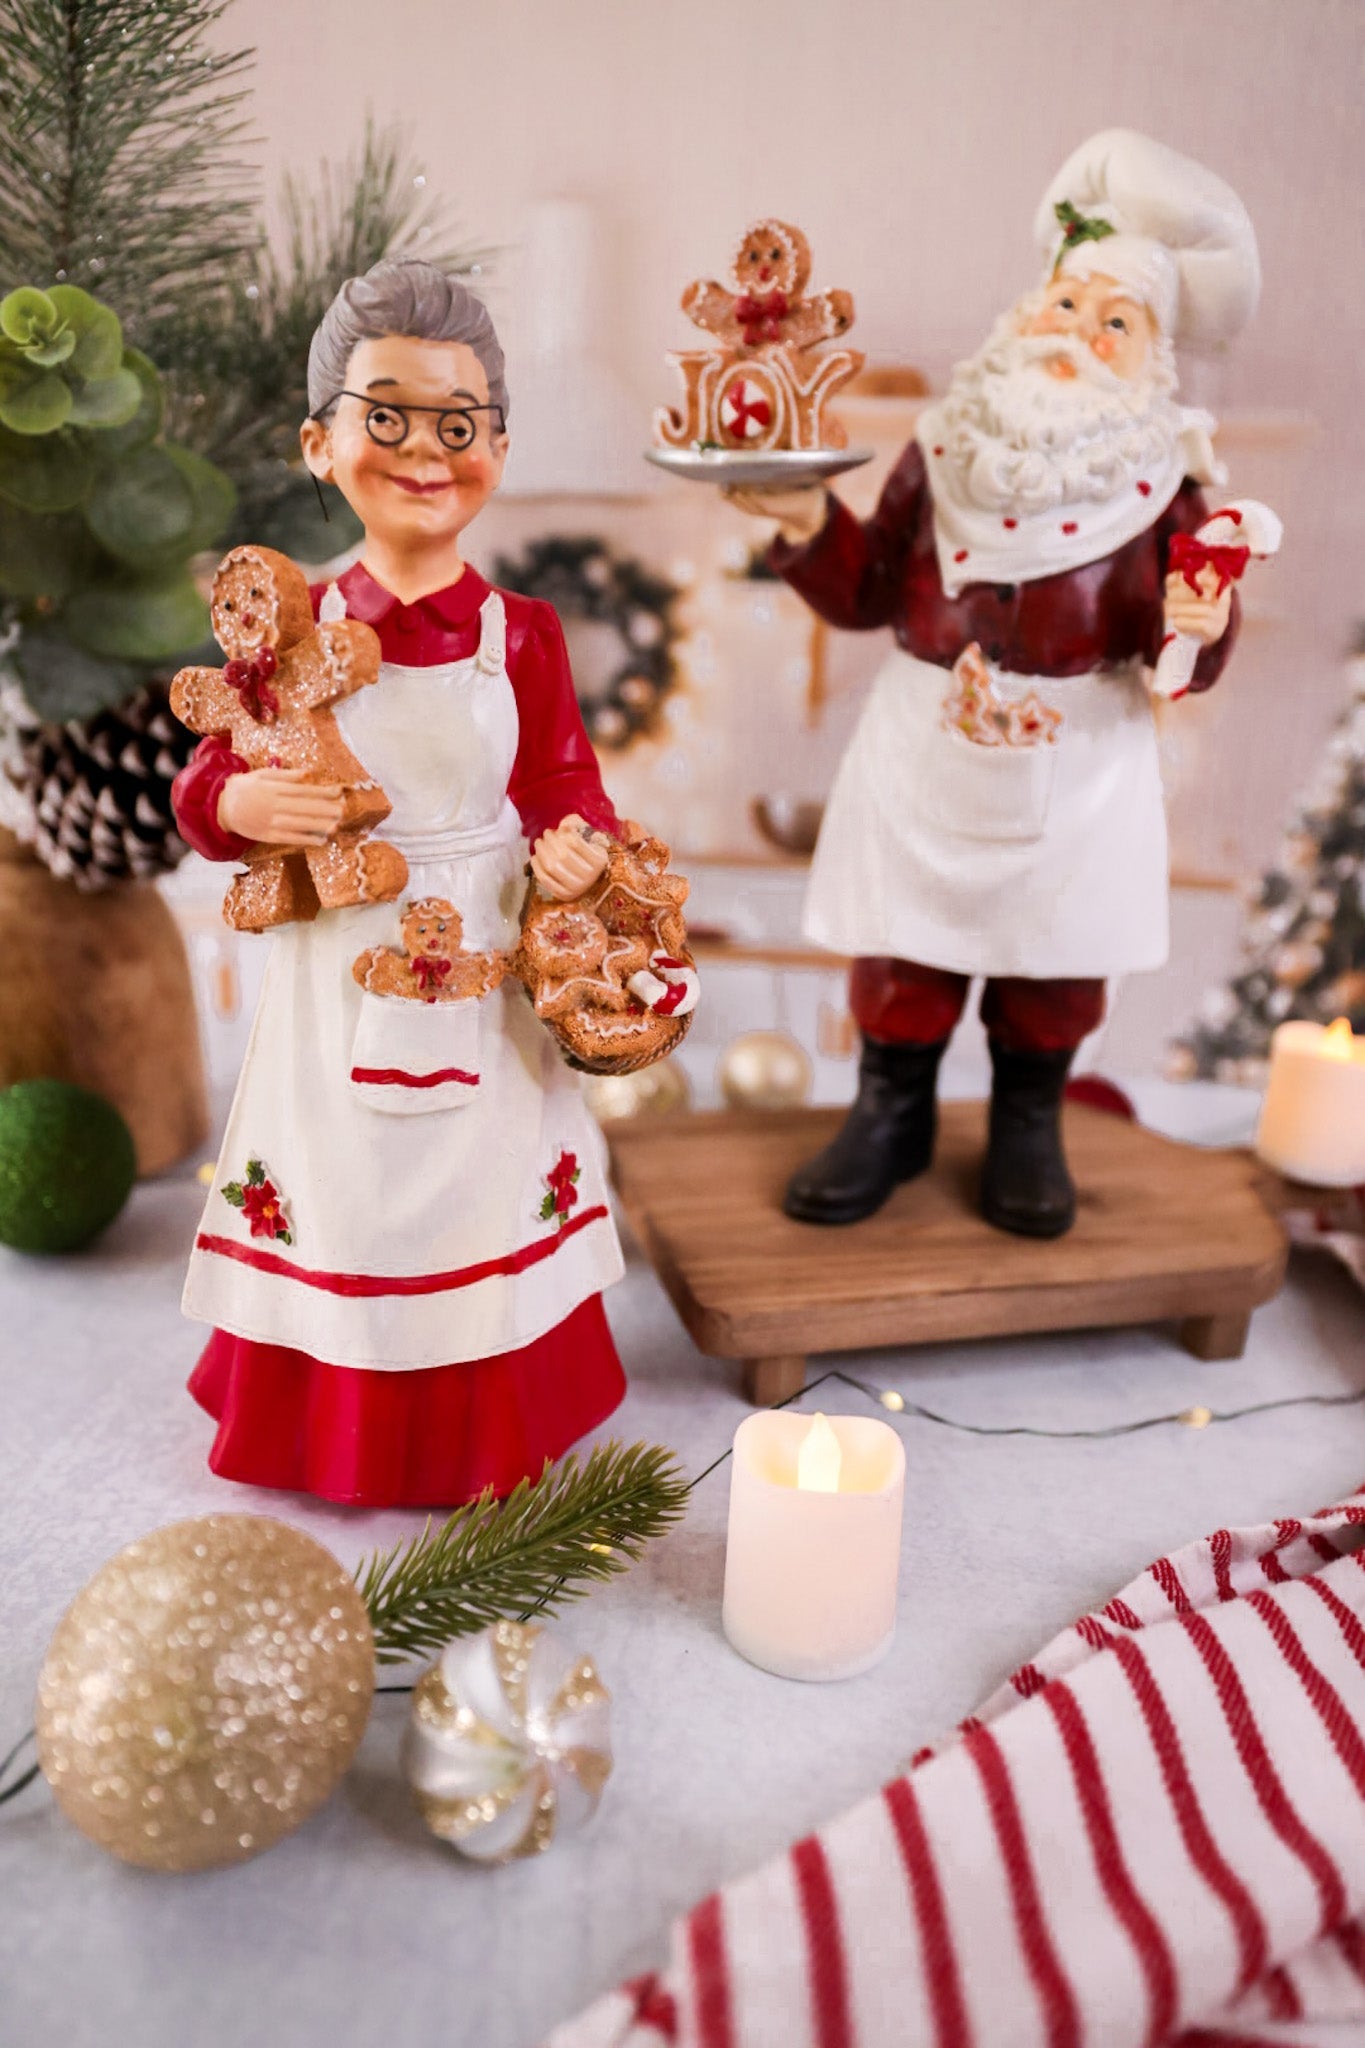 Mr. & Mrs. Clause Resin Table Top Figurines (Two Styles) - Whiskey Skies